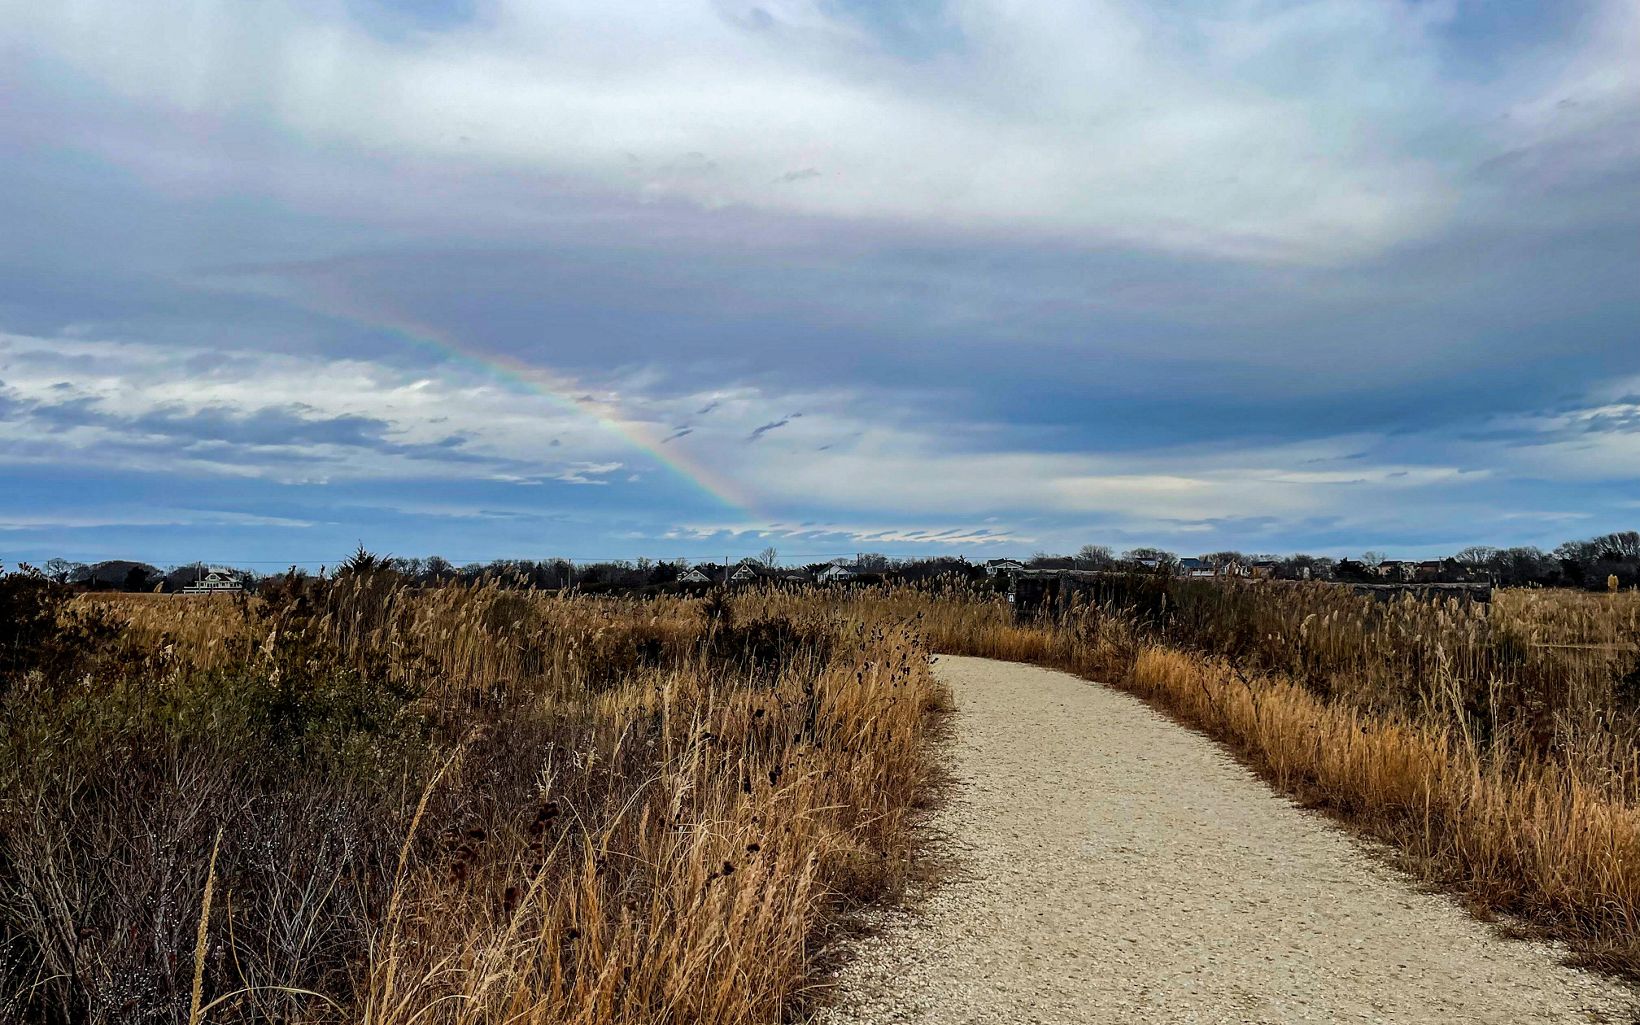 A rainbow is in the sky above a nature trail.